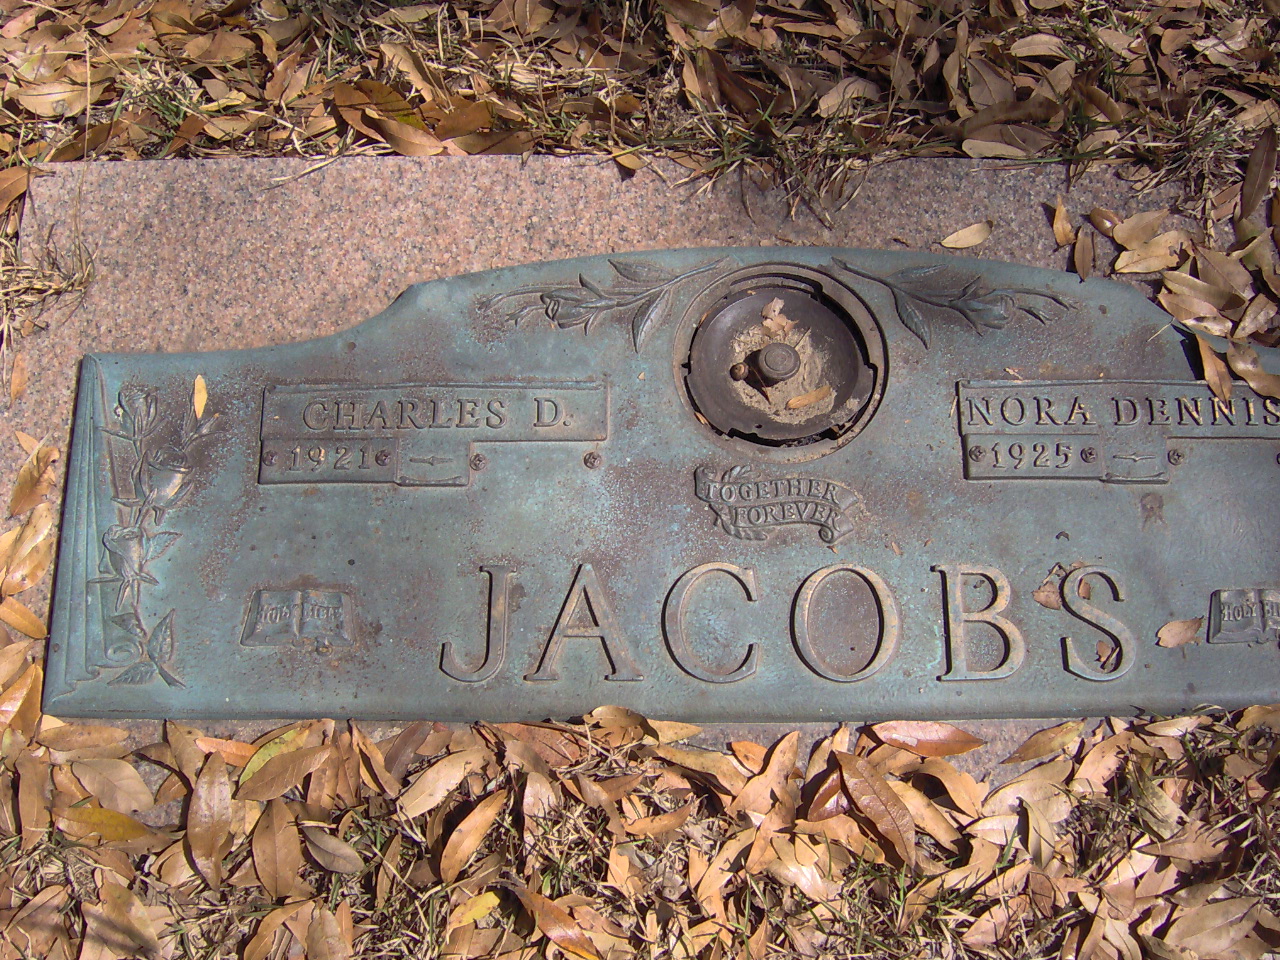 Headstone for Jacobs, Charles D.